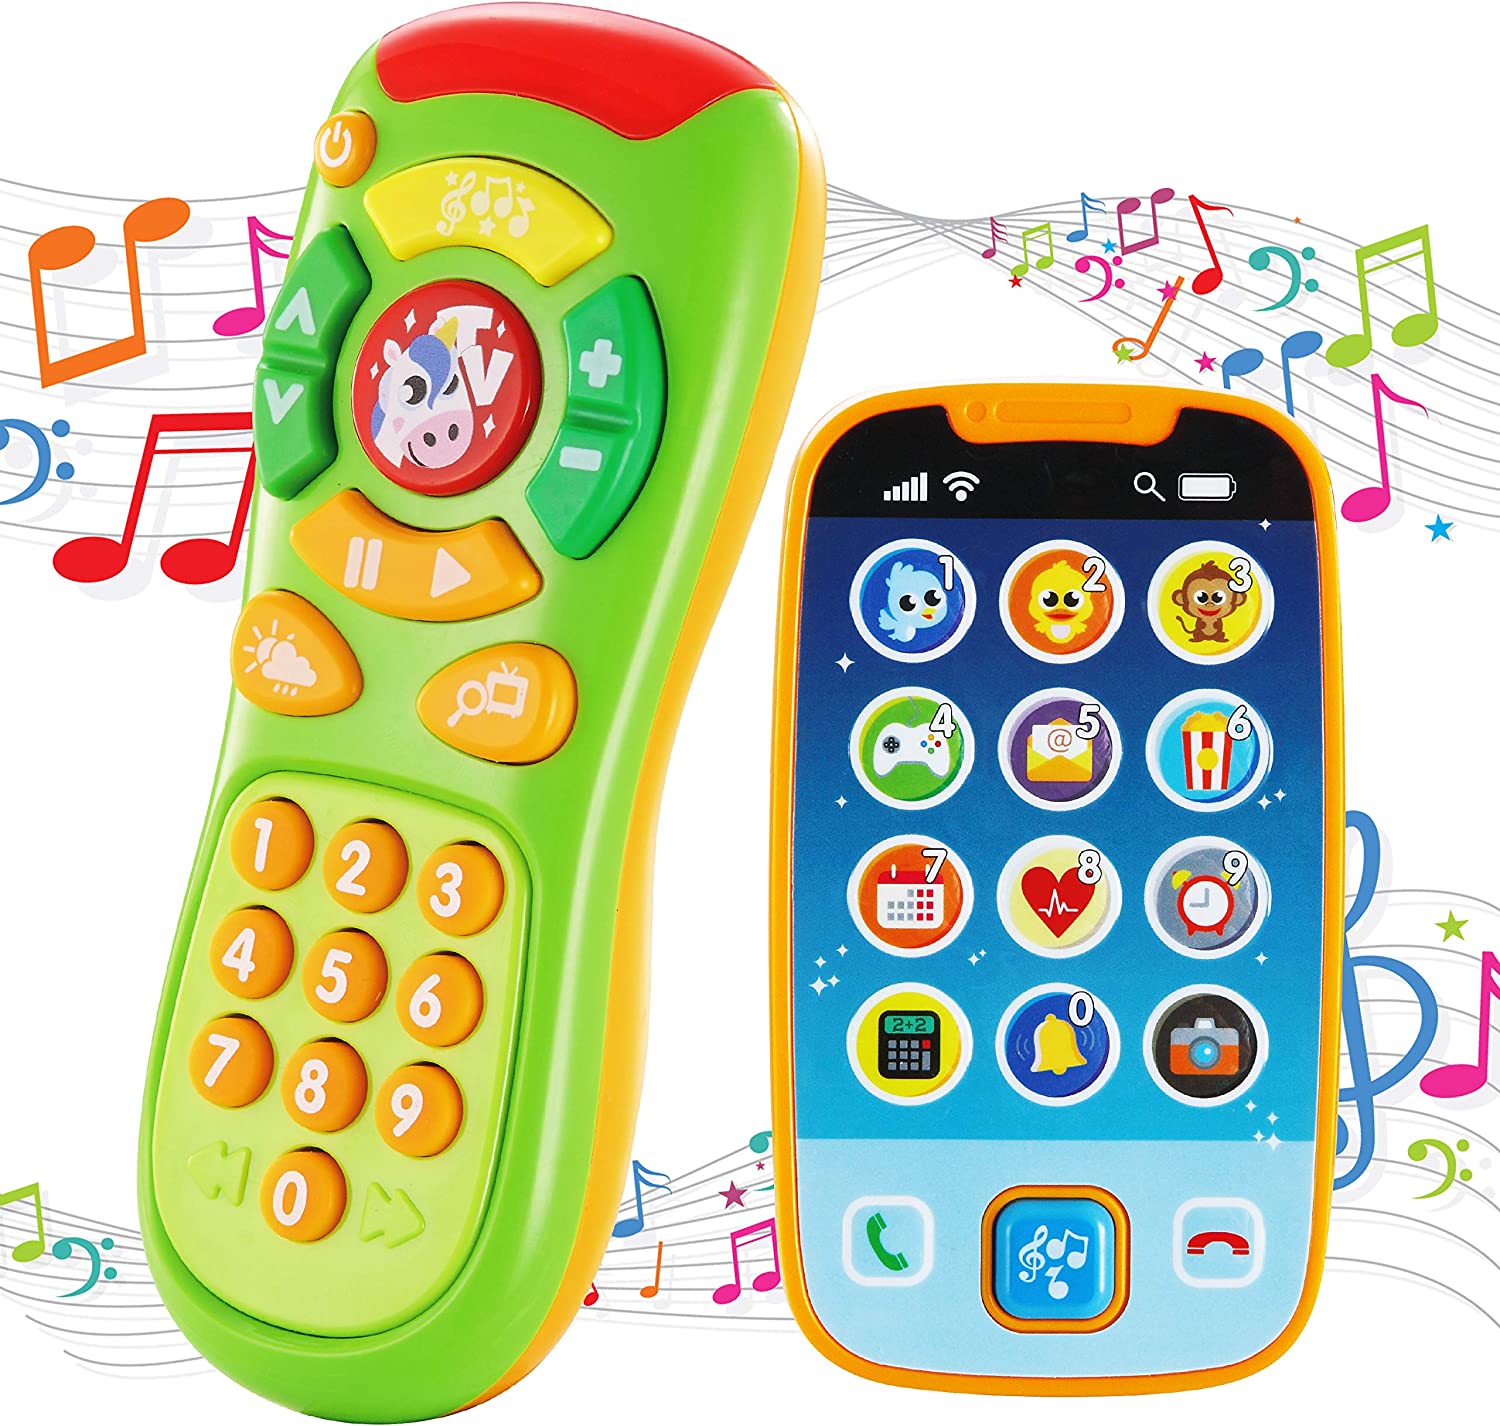 JOYIN Baby Toy Phone, Remote and Smartphone with Music, Fun Learning Musical Toys for Babies, Kids, Boys or Girls, Holiday Stocking Stuffers, Birthday